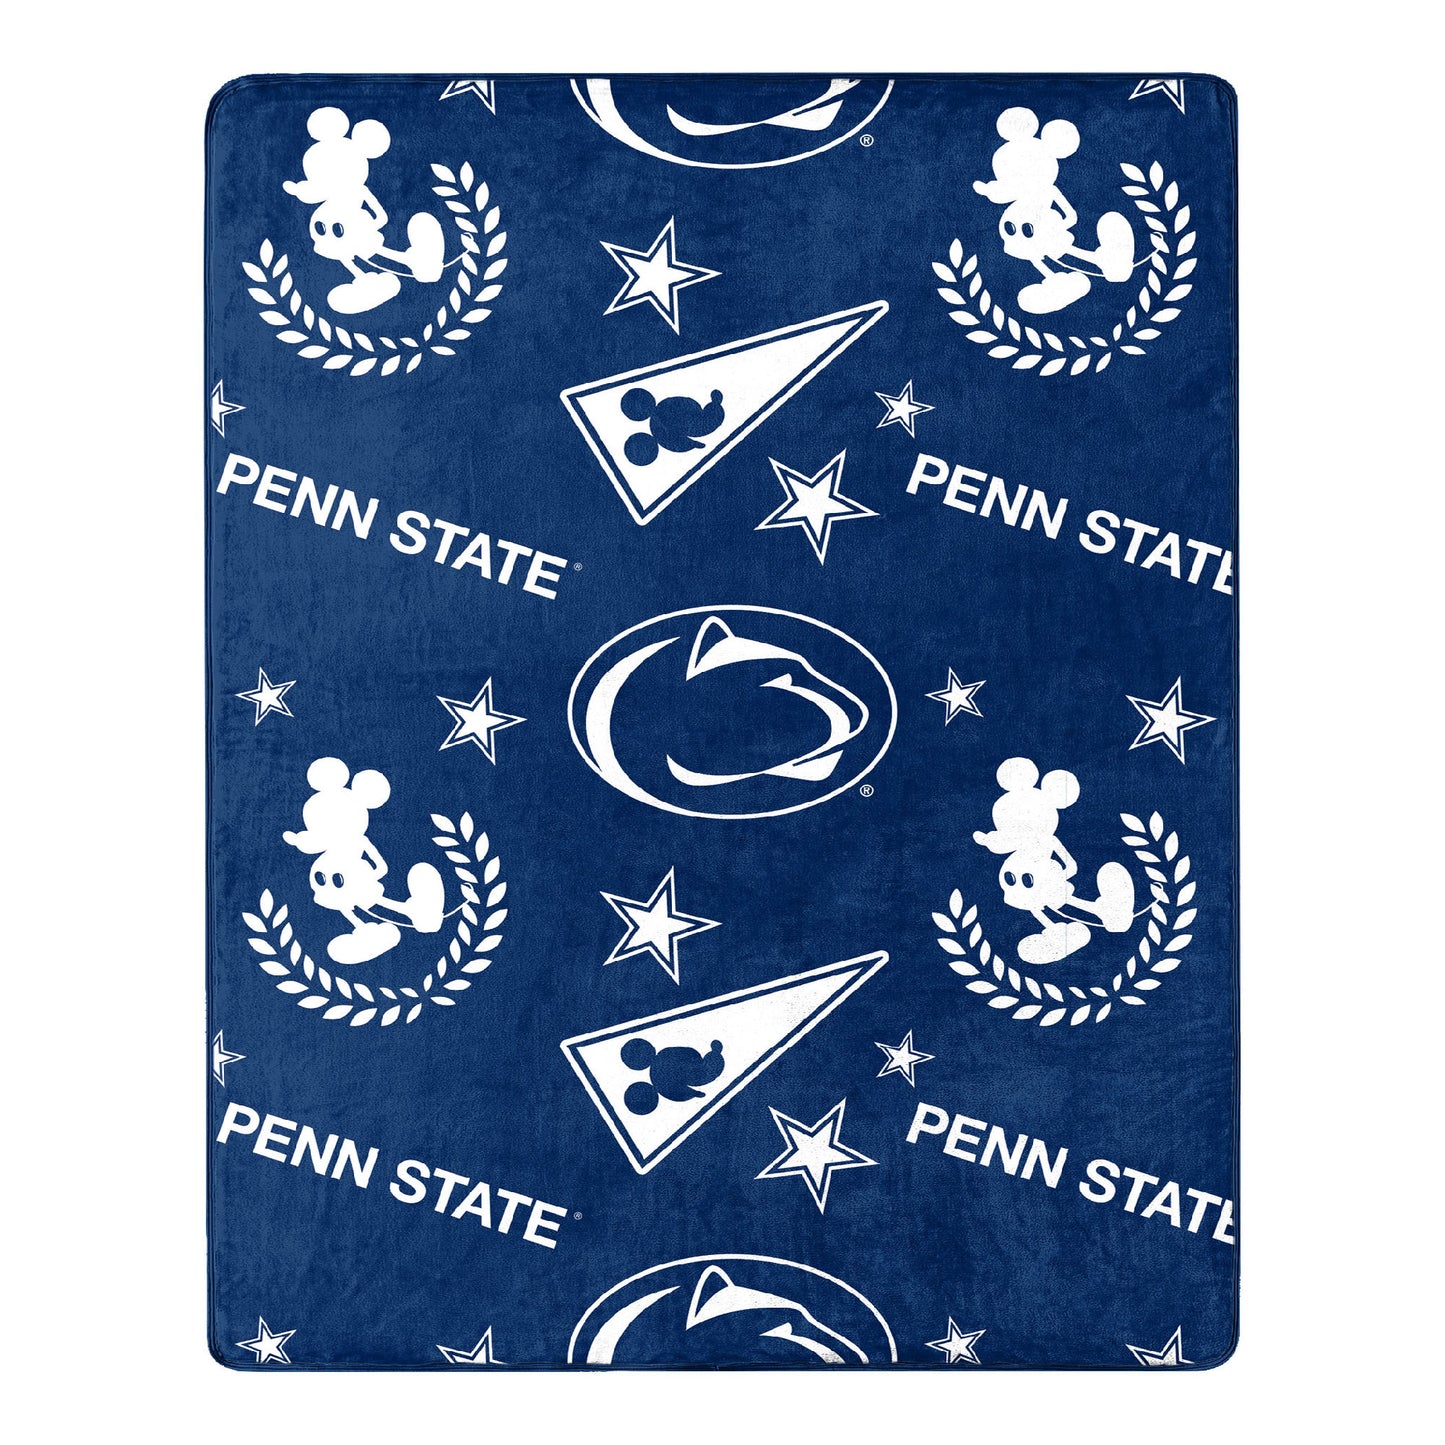 Penn State OFFICIAL NCAA & Disney's Mickey Mouse Character Hugger Pillow & Silk Touch Throw Set